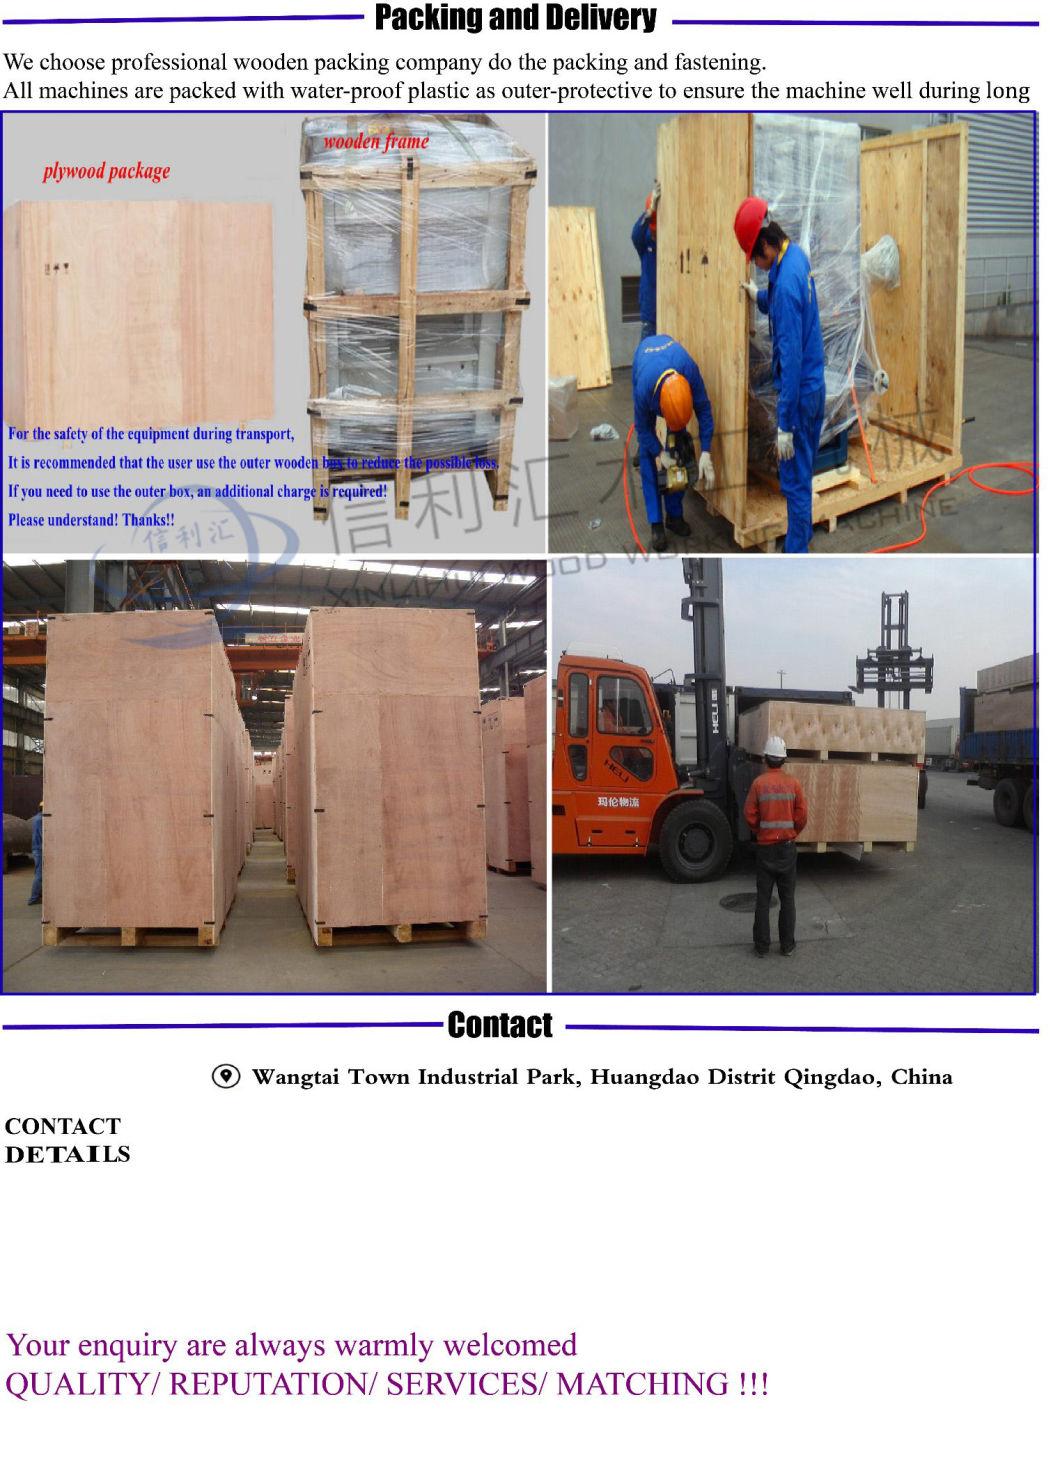 Short Cycle Press Machine Short Cycle Press for The Production of Melamine Face MDF and Solid Wood and Chipboard, Chipboard Manufacturing Machine